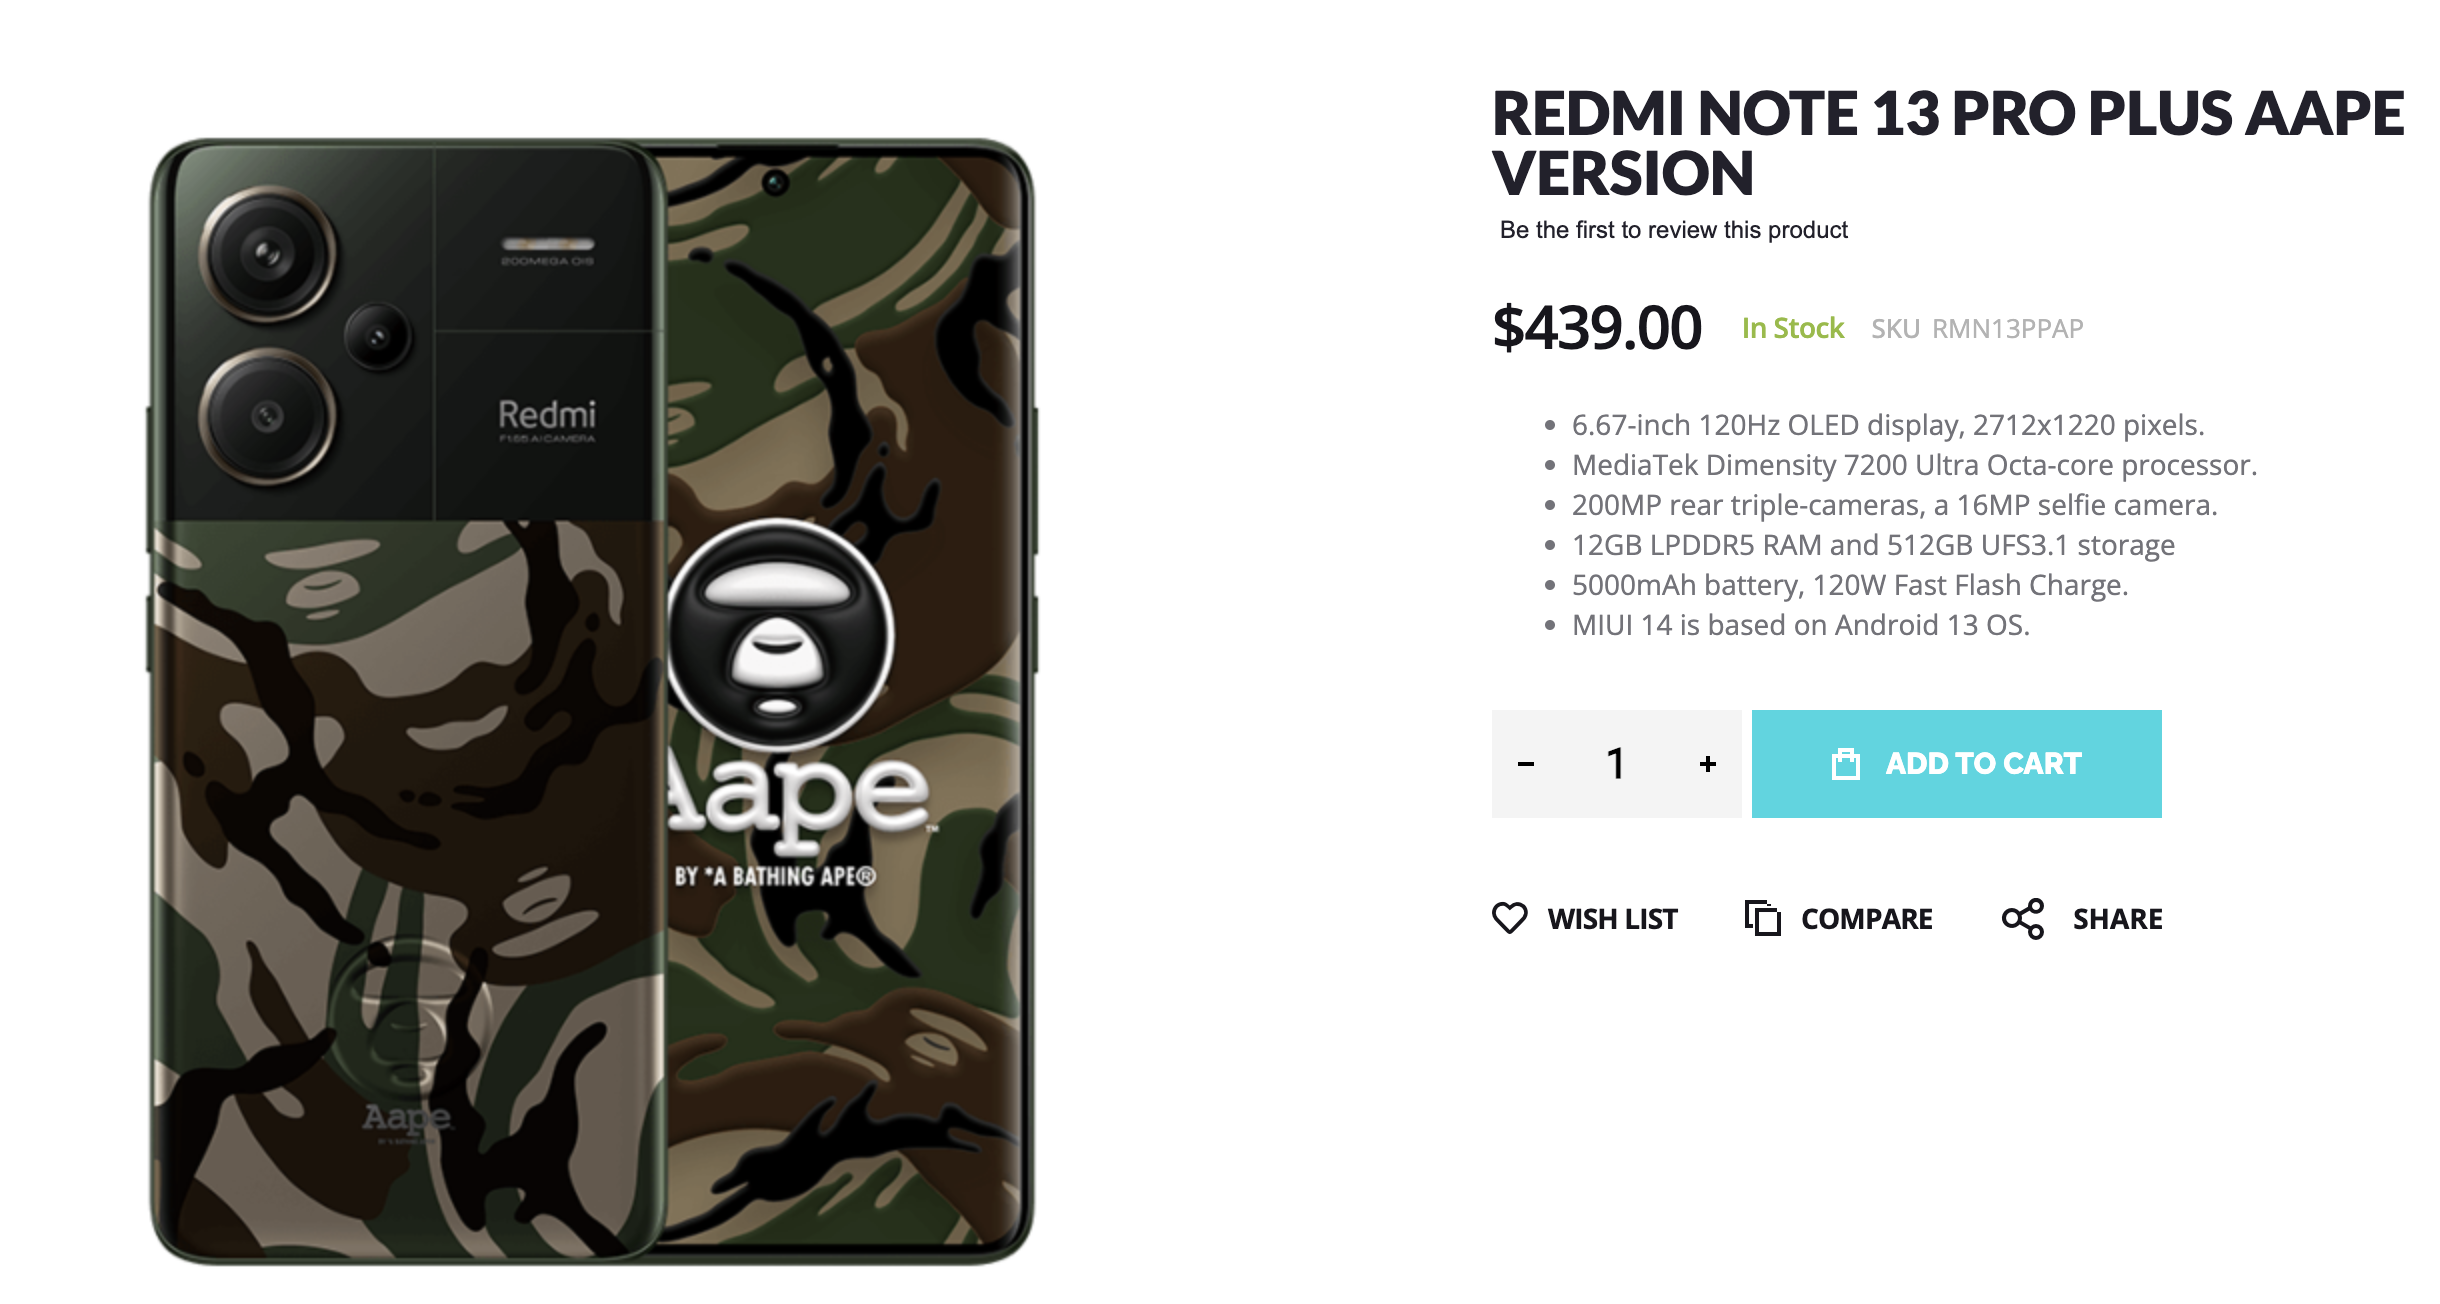 The Cool new Redmi Note 13 Pro+ AAPE Trend Limited Edition
is available on Giztop